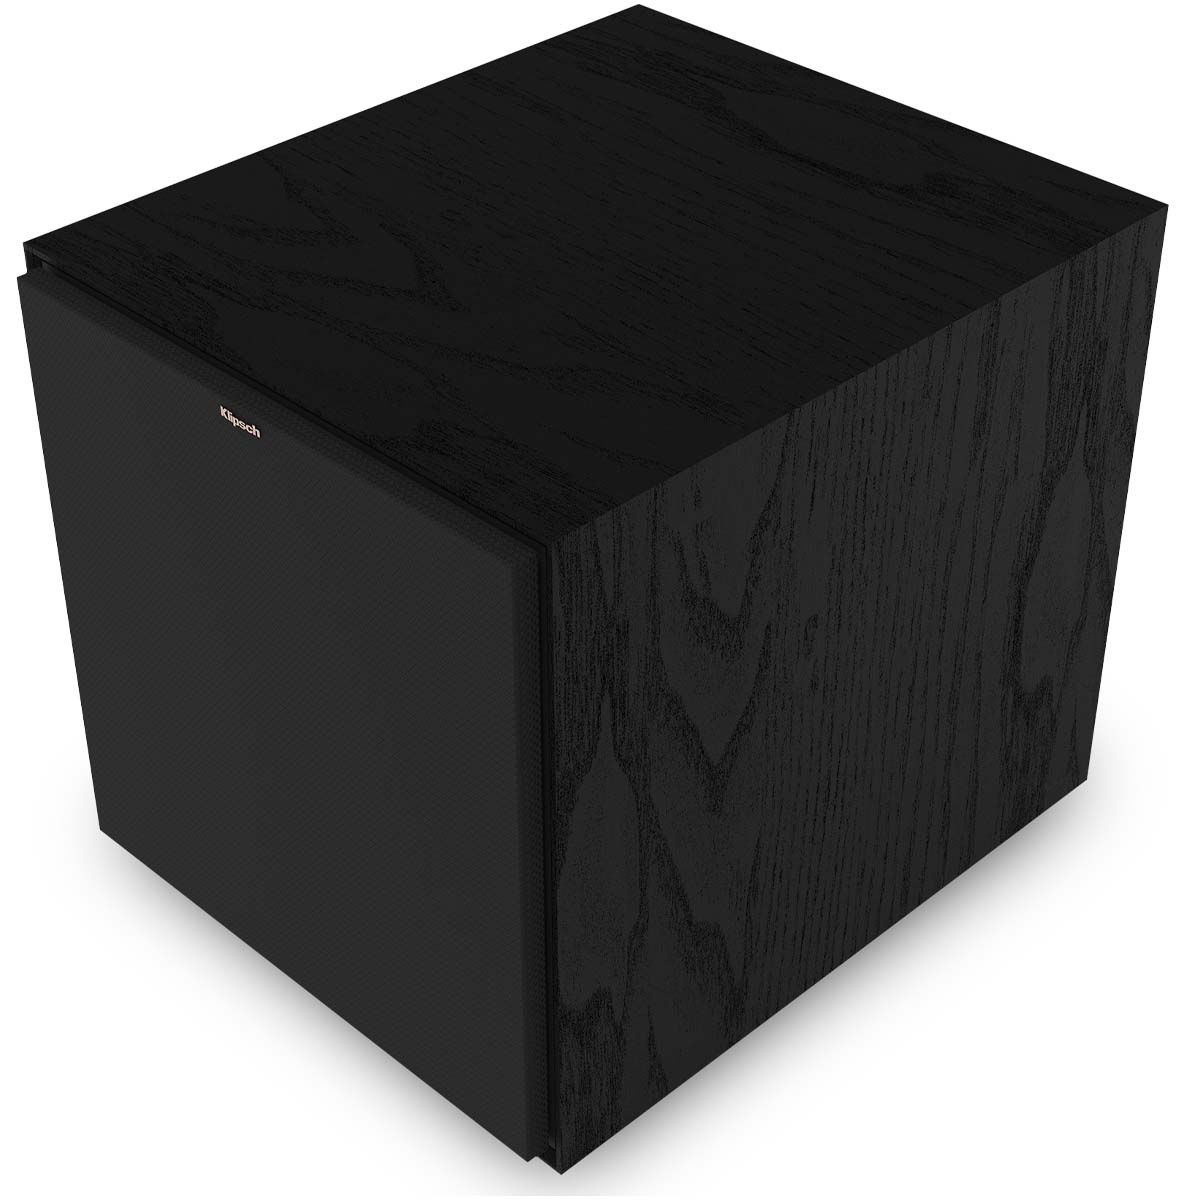 Klipsch R-121SW 12" Subwoofer - angled front view with grille